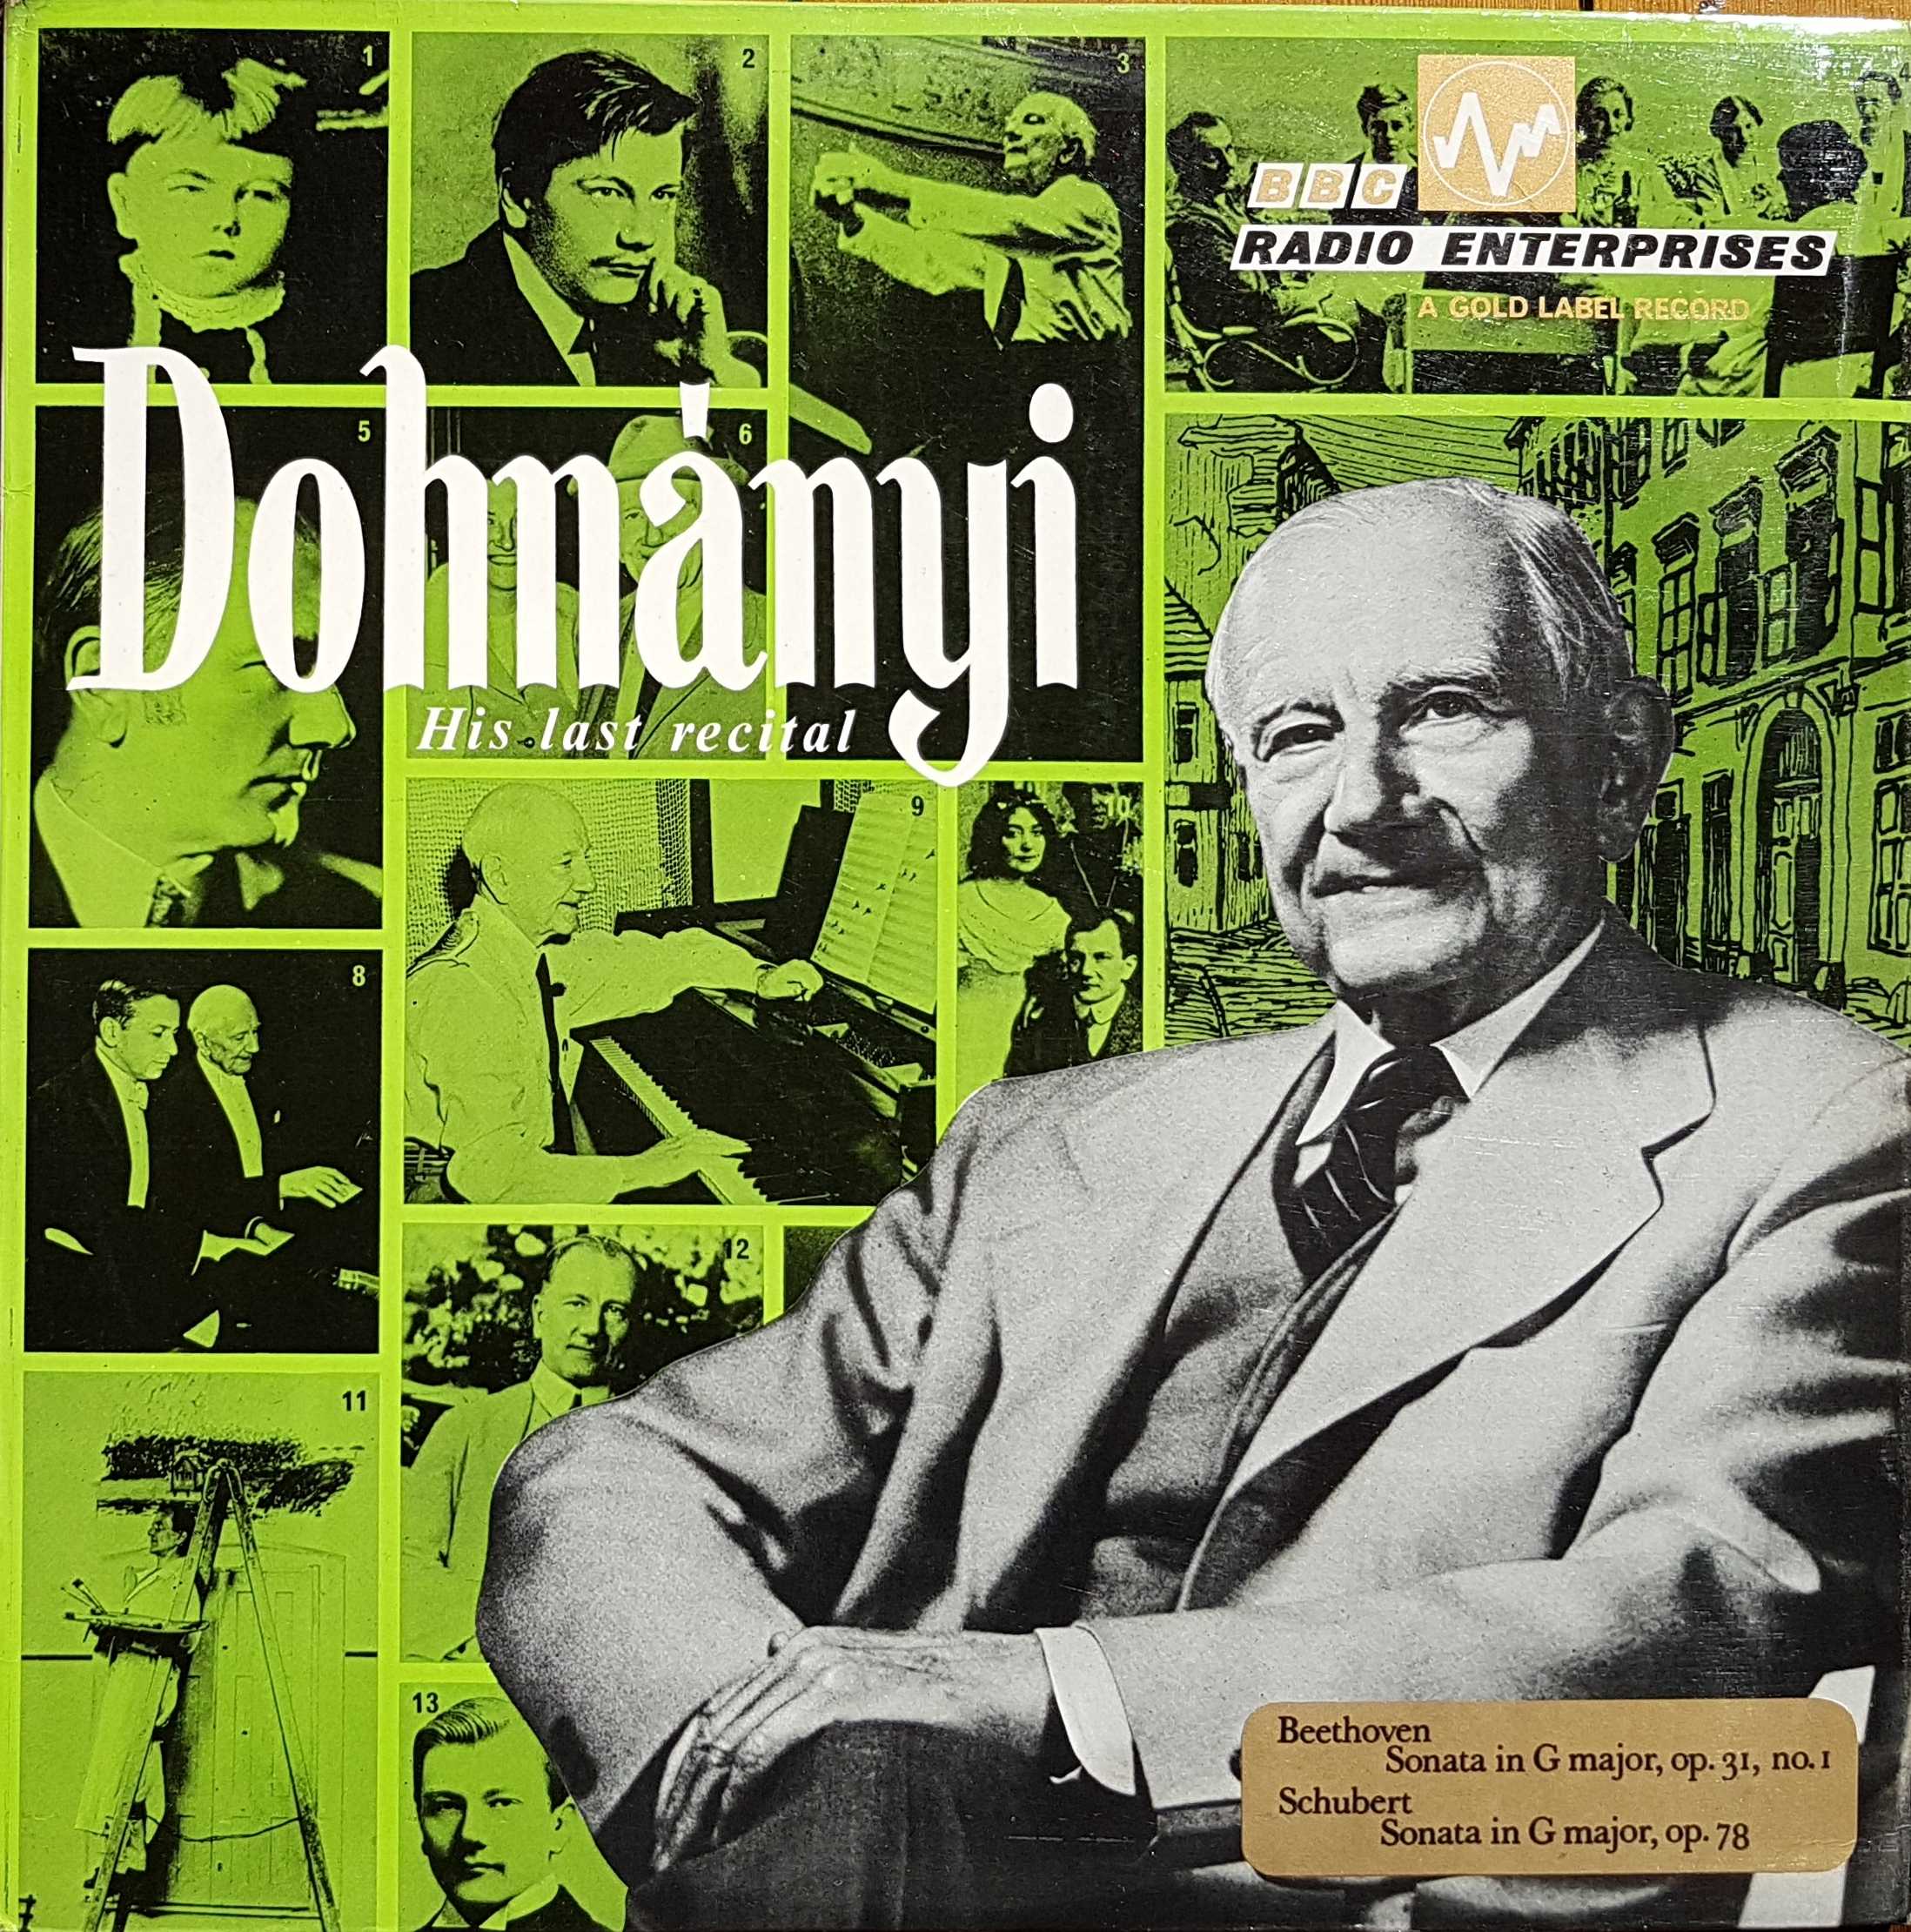 Picture of Dohnanyi - his last recital by artist Dohnanyi from the BBC albums - Records and Tapes library